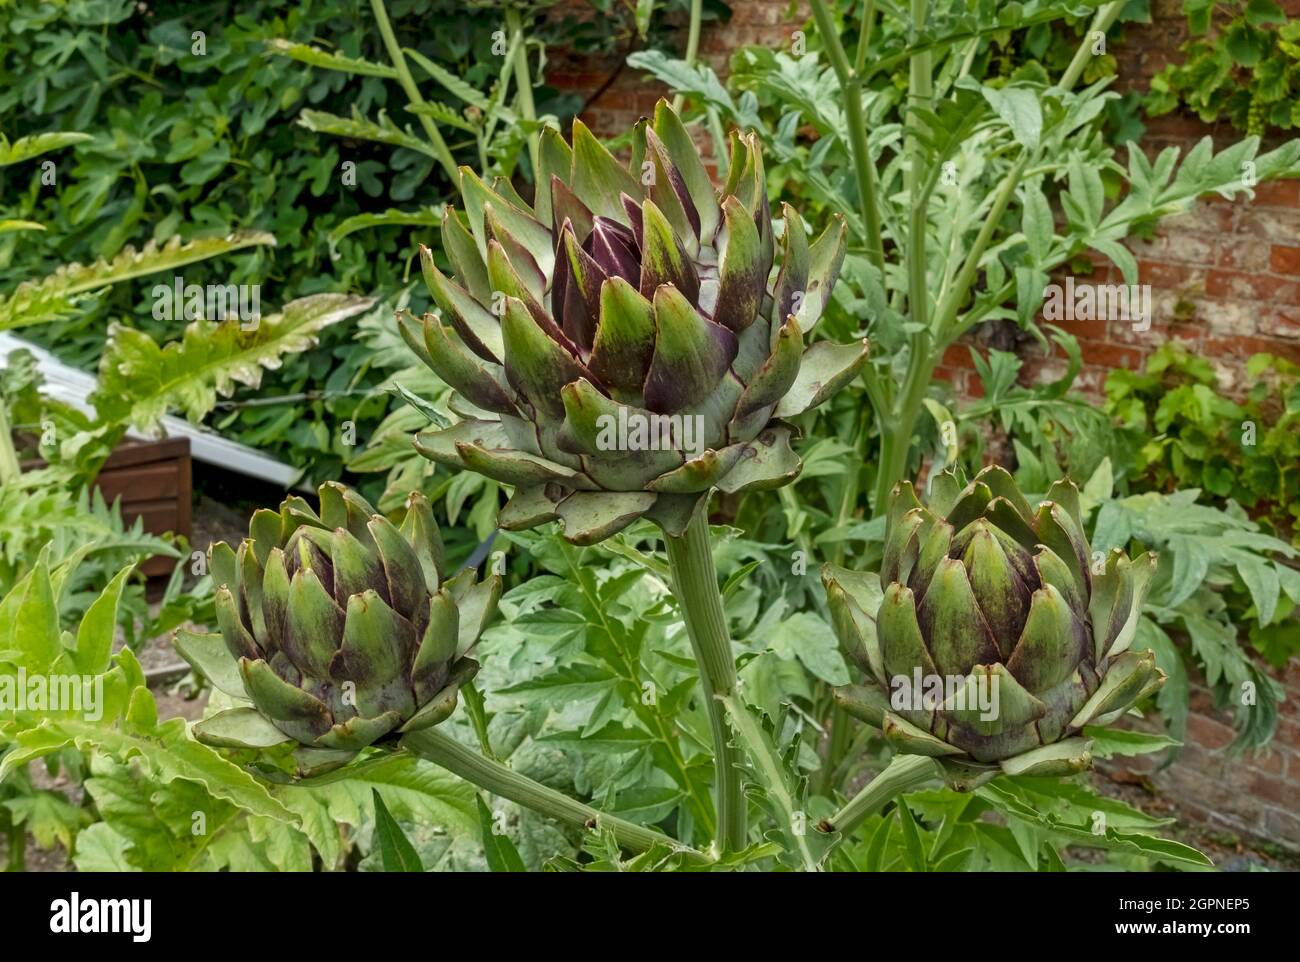 Close up of globe artichoke artichokes growing in a vegetable garden in summer England UK United Kingdom GB Great Britain Stock Photo